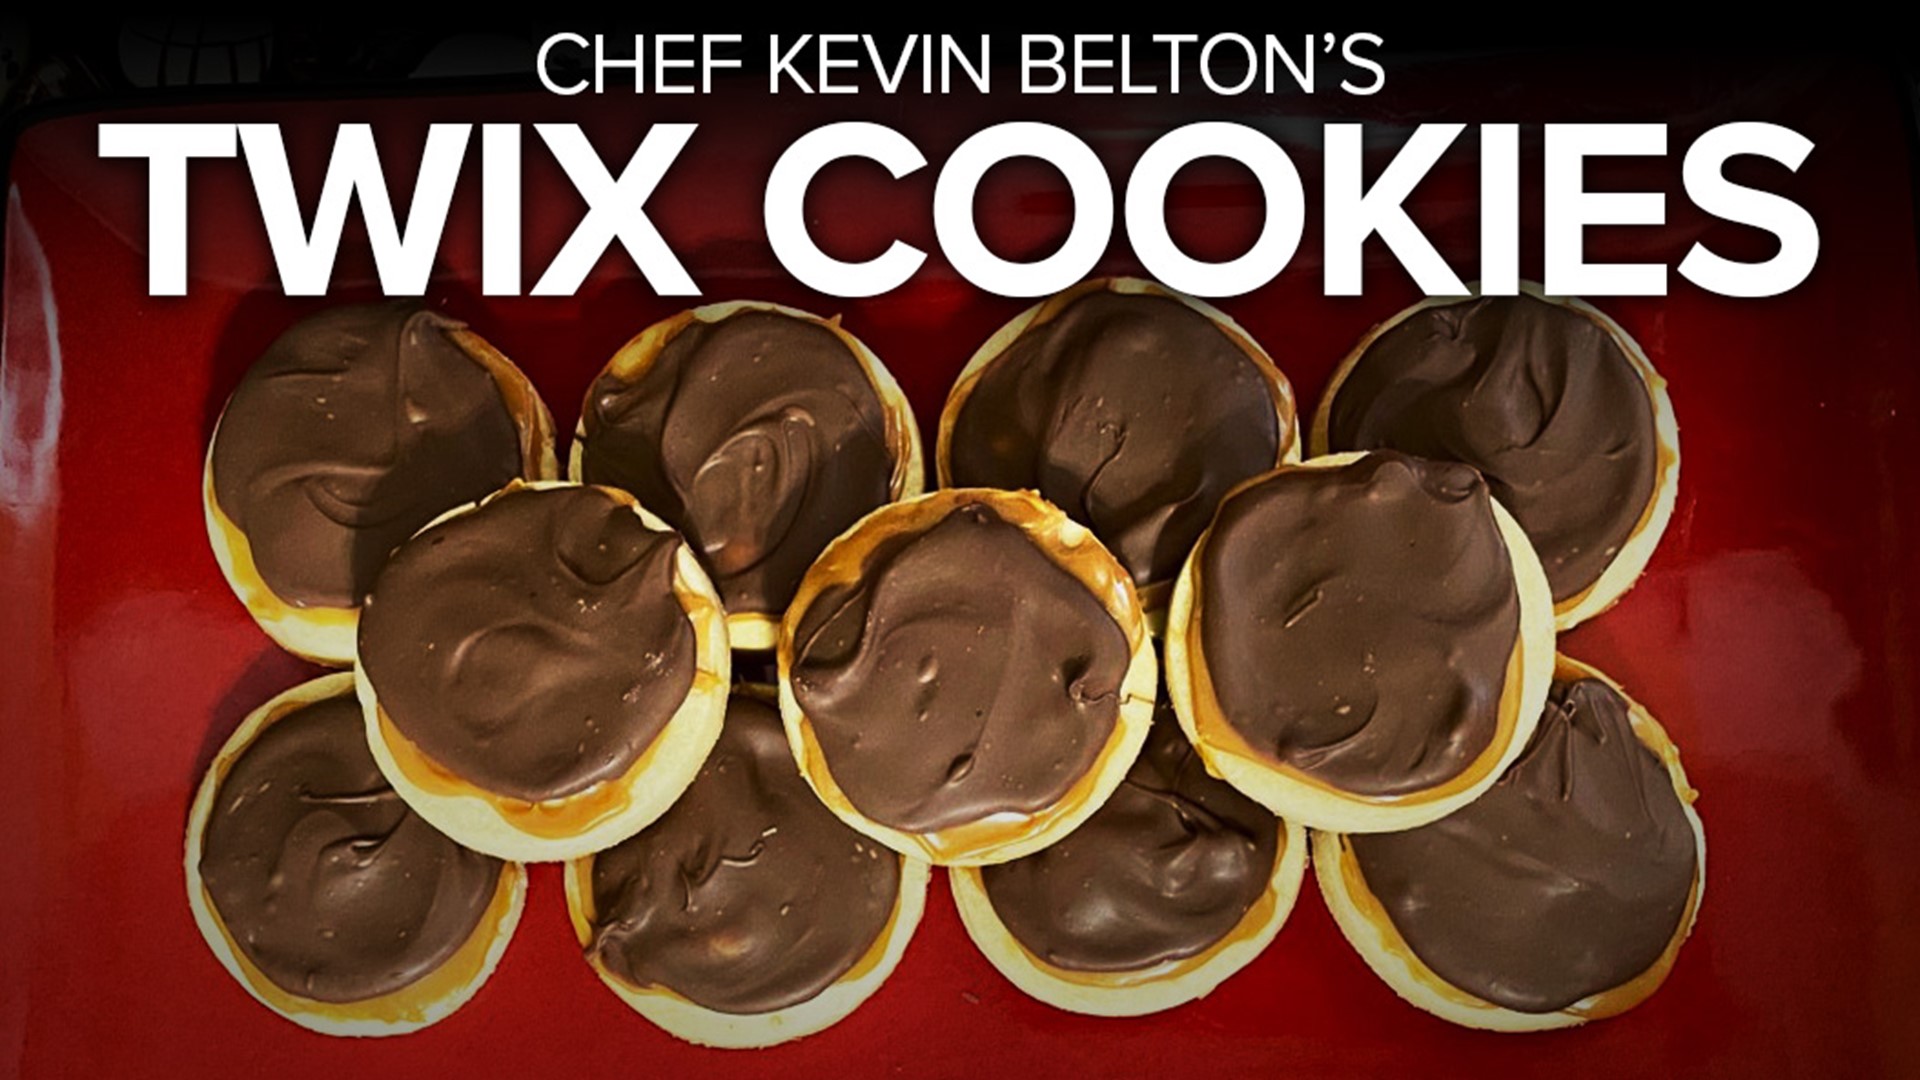 Can you believe it's caramel and chocolate day? Let's celebrate by making a Twix cookie!